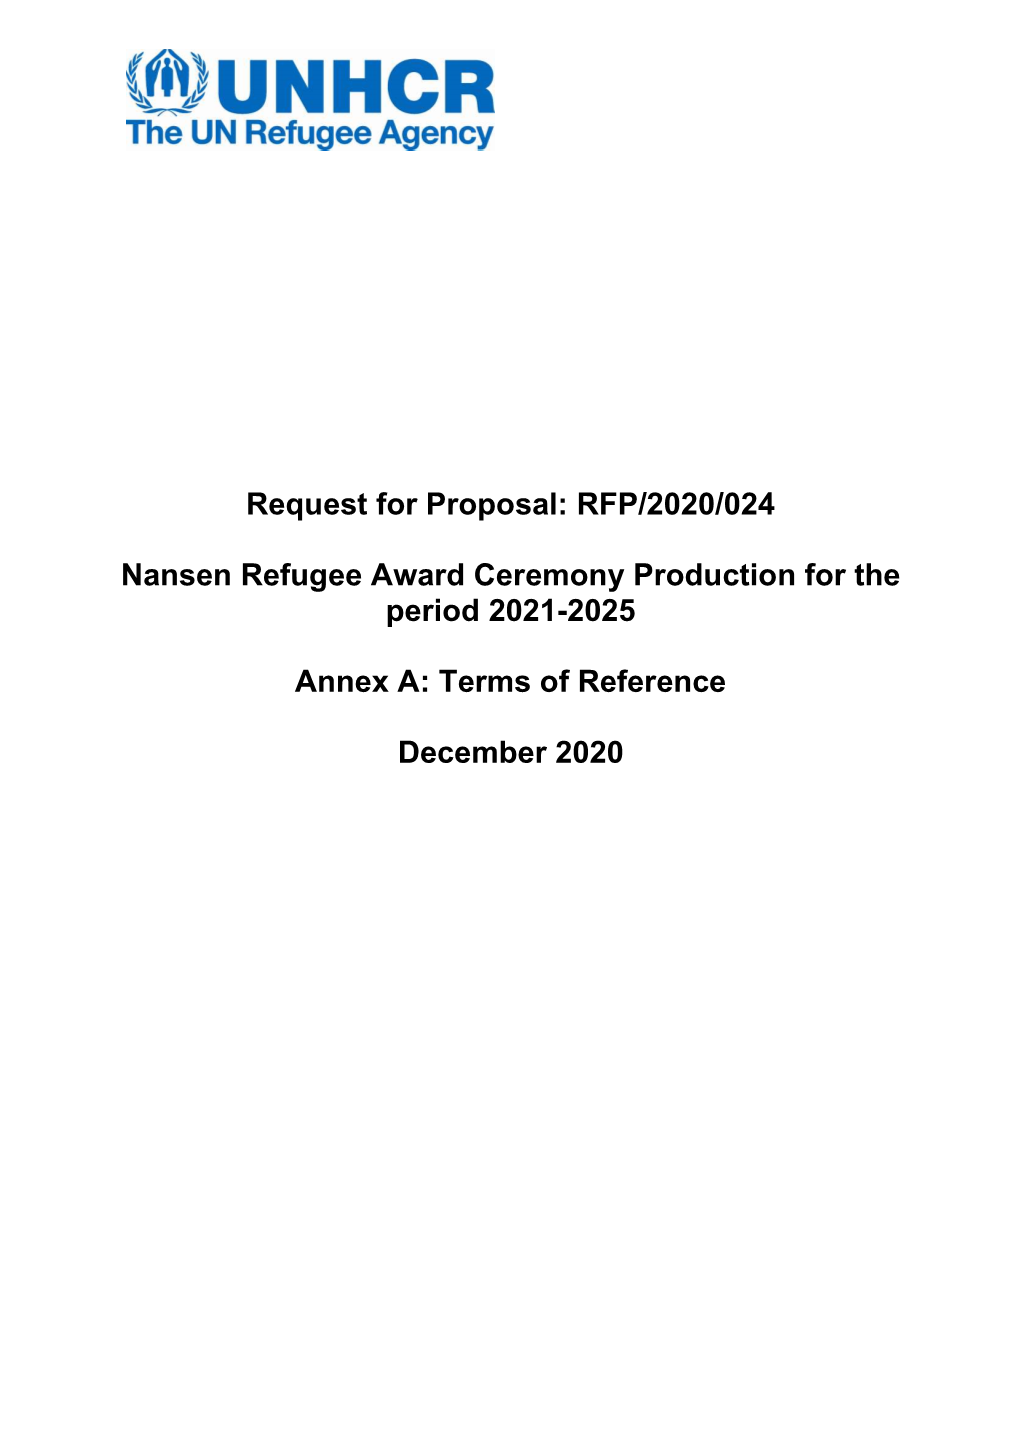 RFP/2020/024 Nansen Refugee Award Ceremony Production for the Period 2021-2025 Annex A